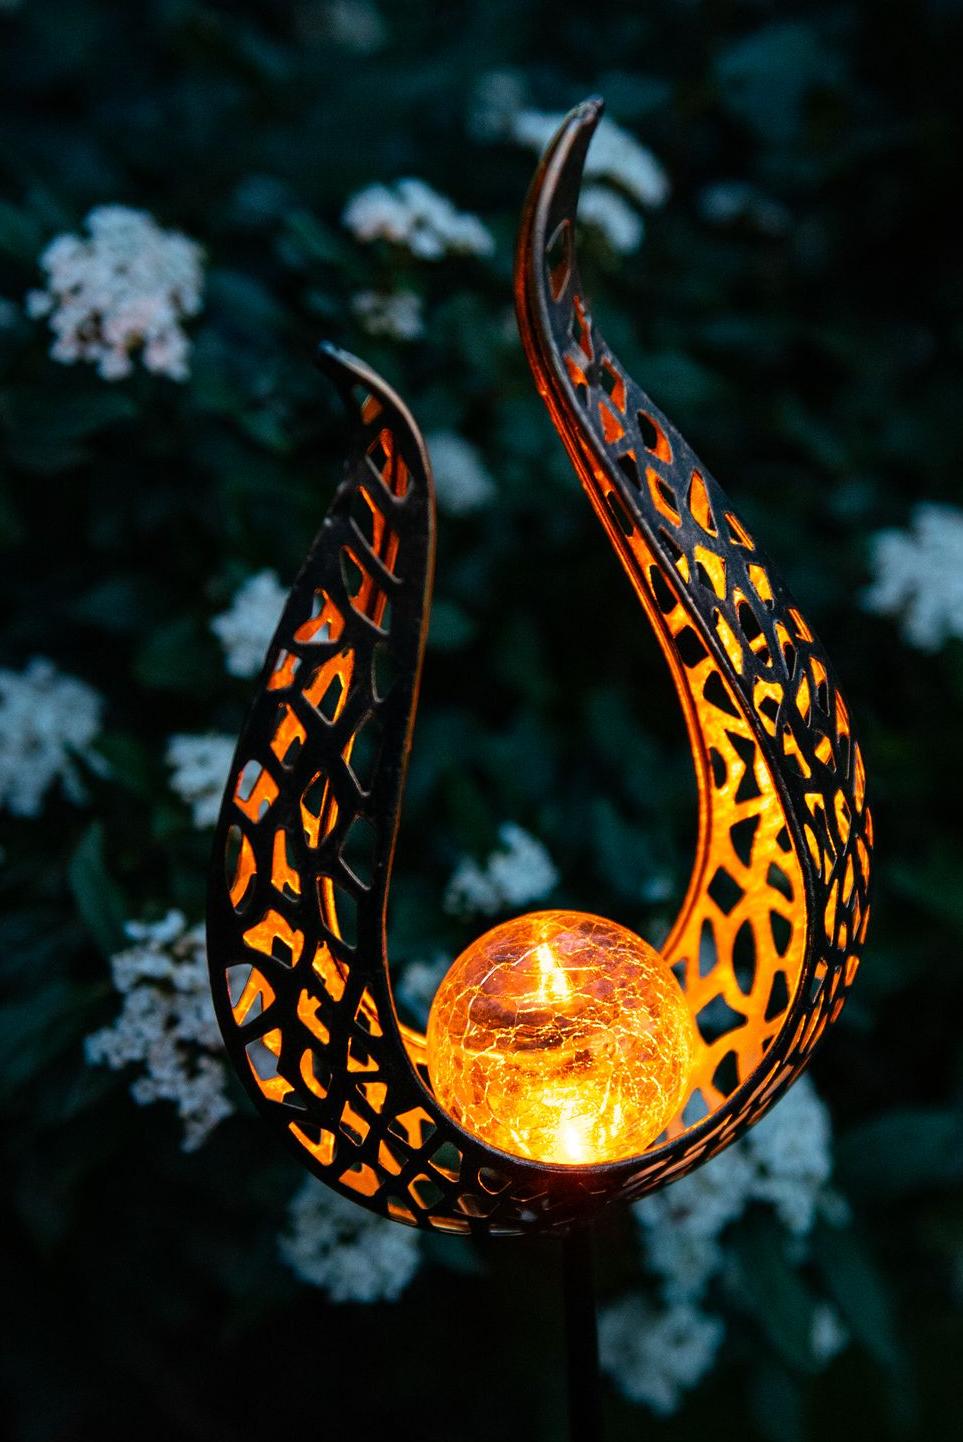 Decorative solar lamp on stake in the shape of an open flame with a glass ball emitting an orange color with a fiery effect. Garden ID